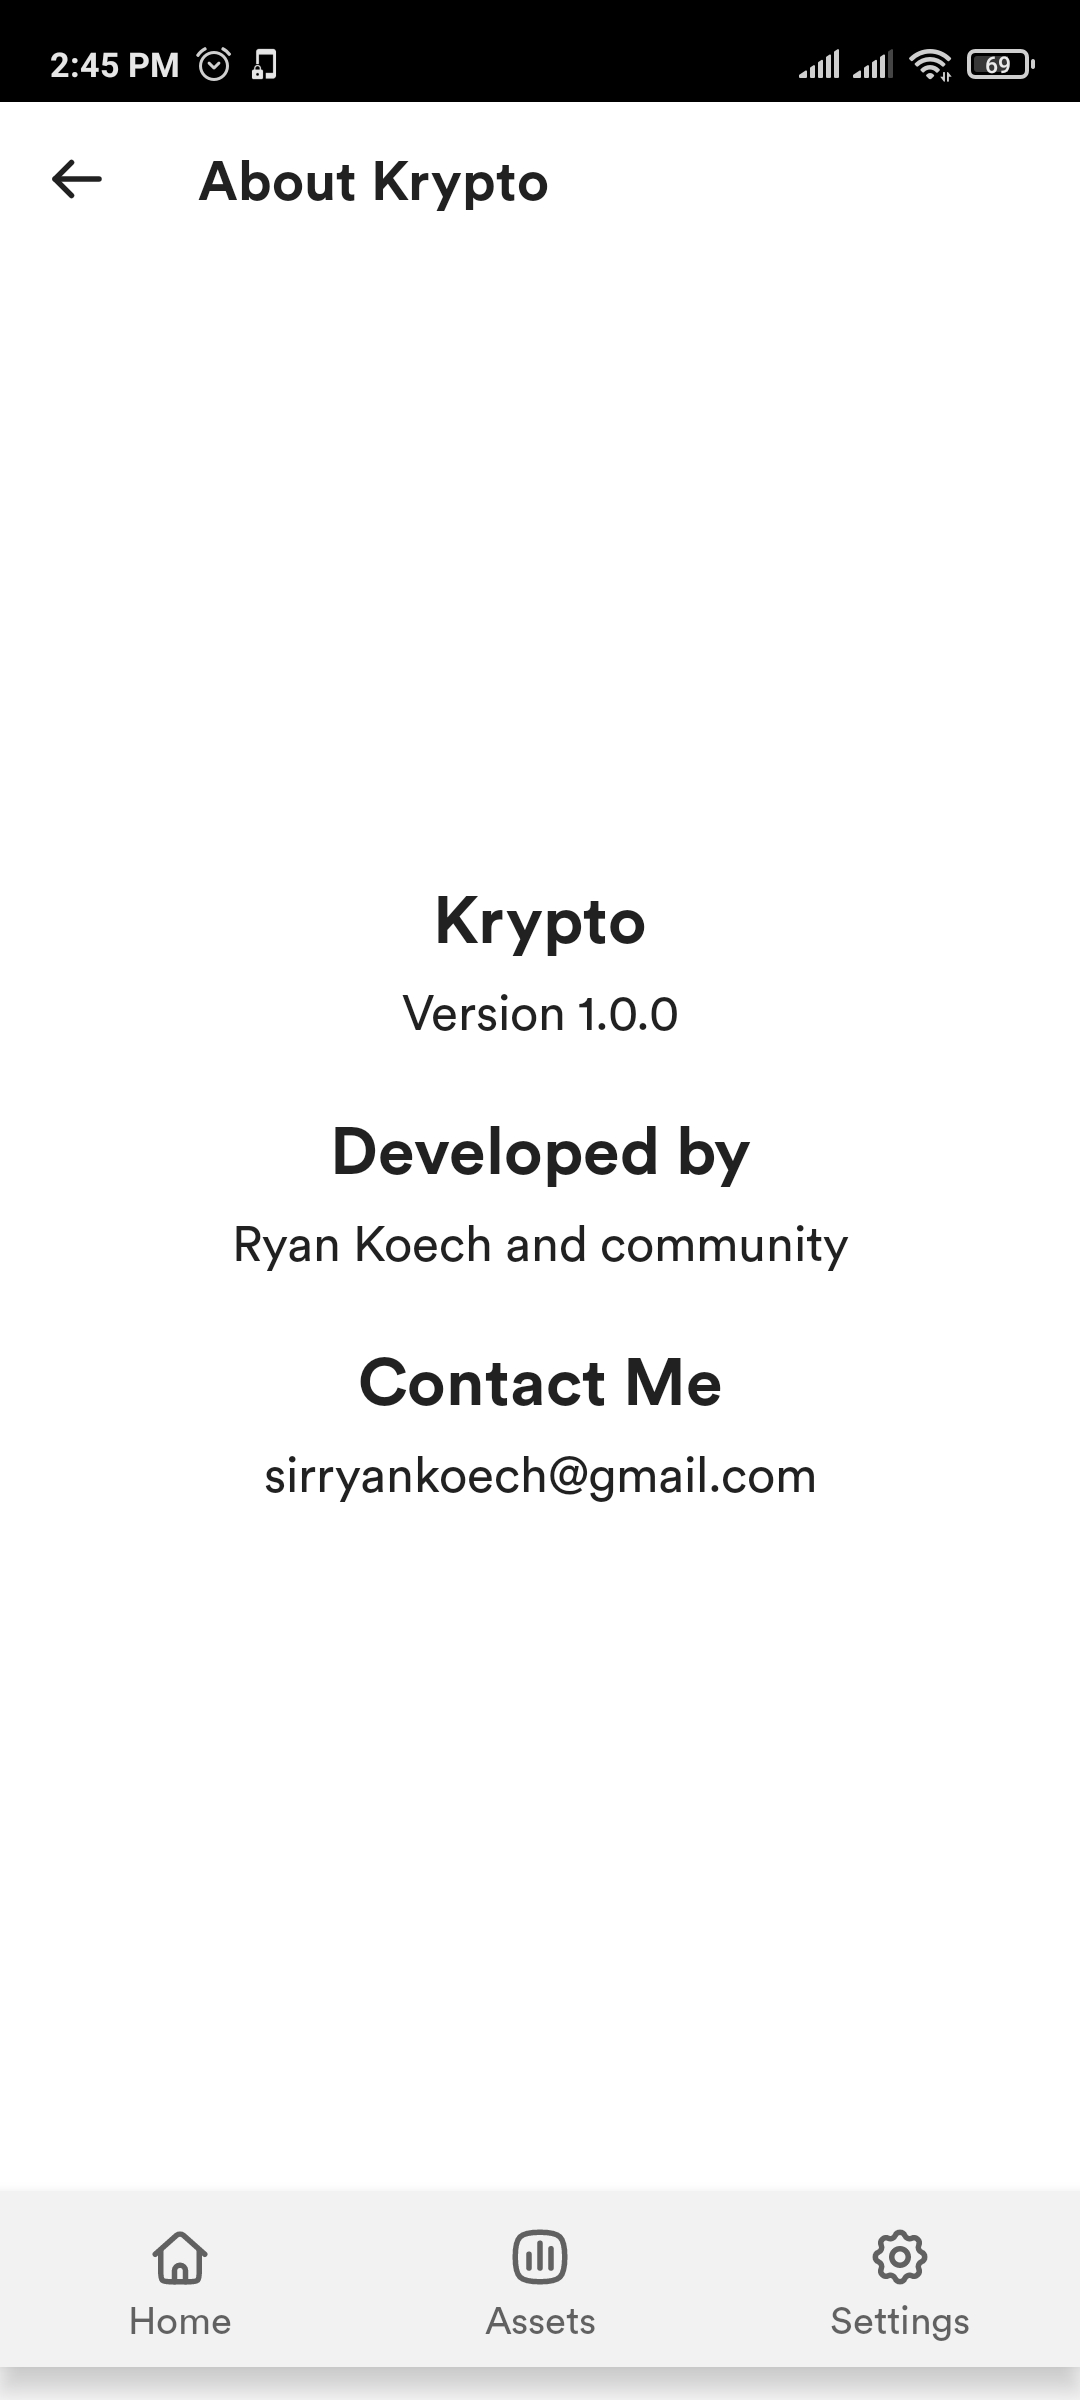 About Krypto asset screen